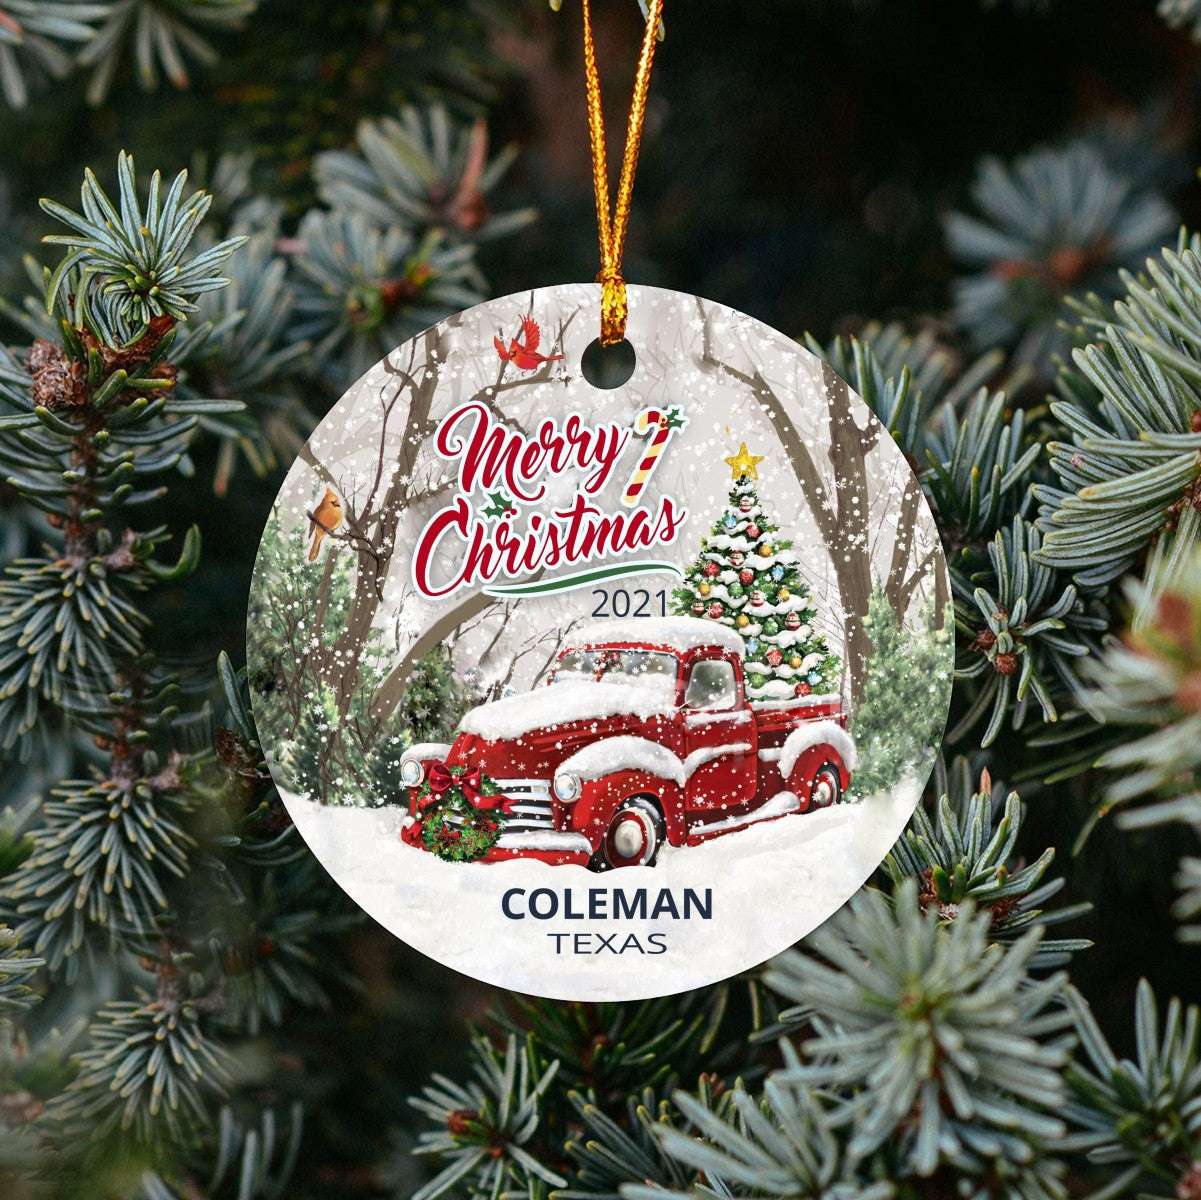 Christmas Tree Ornaments Coleman - Ornament With Name City, State Coleman Texas TX Ornament - Red Truck Xmas Ornaments 3'' Plastic Gift For Family, Friend And Housewarming